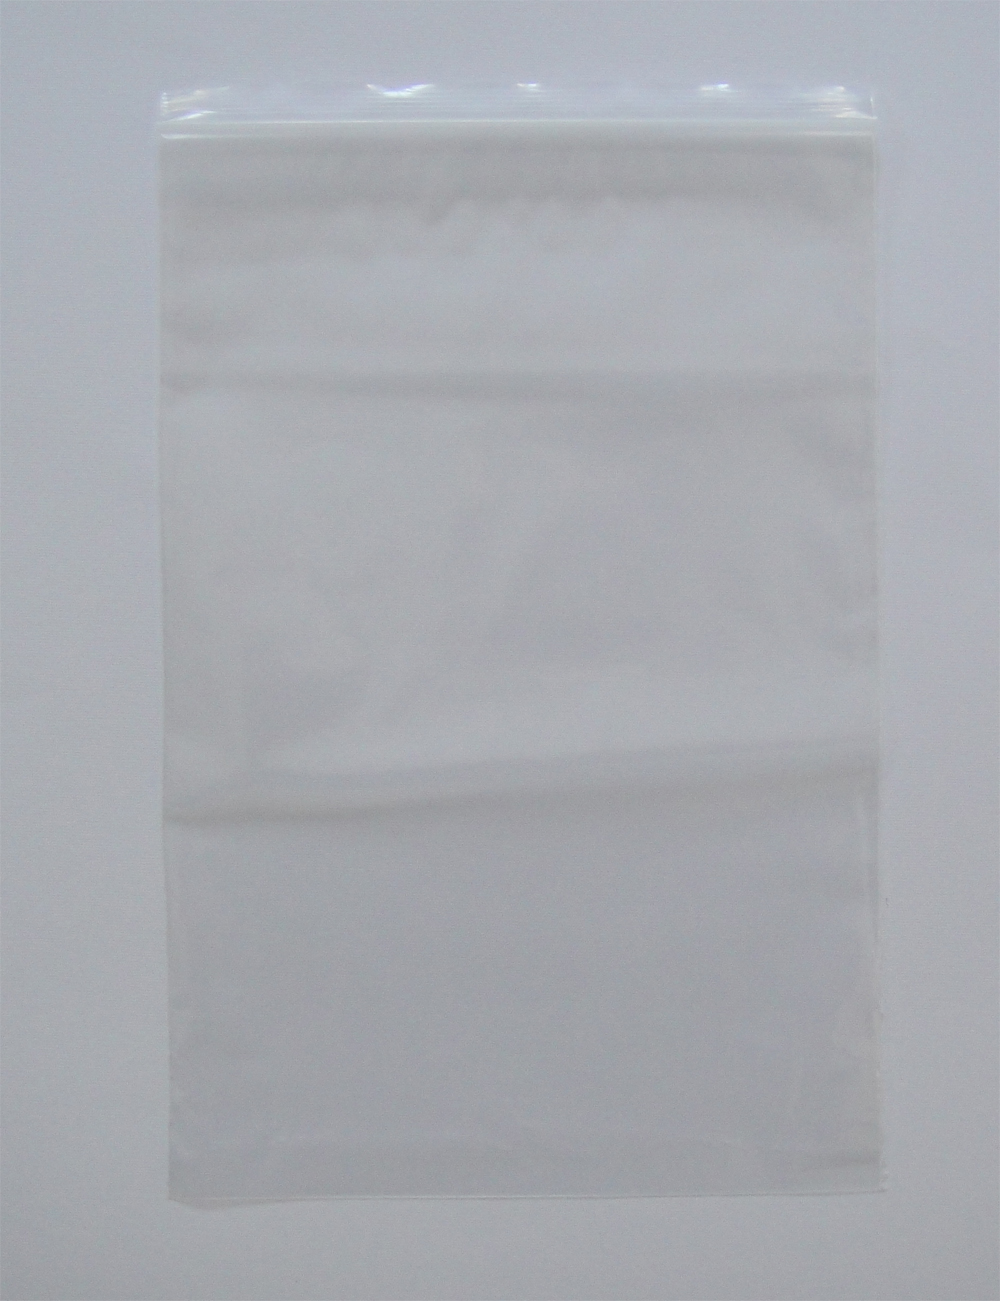 All Sizes Available- Free UK Delivery Suitable for Auto Parts and Domestic Use 2.25 x 3.00 100 Plain Resealable Reusable Grip Seal Clear Poly Plastic Storage Bags 